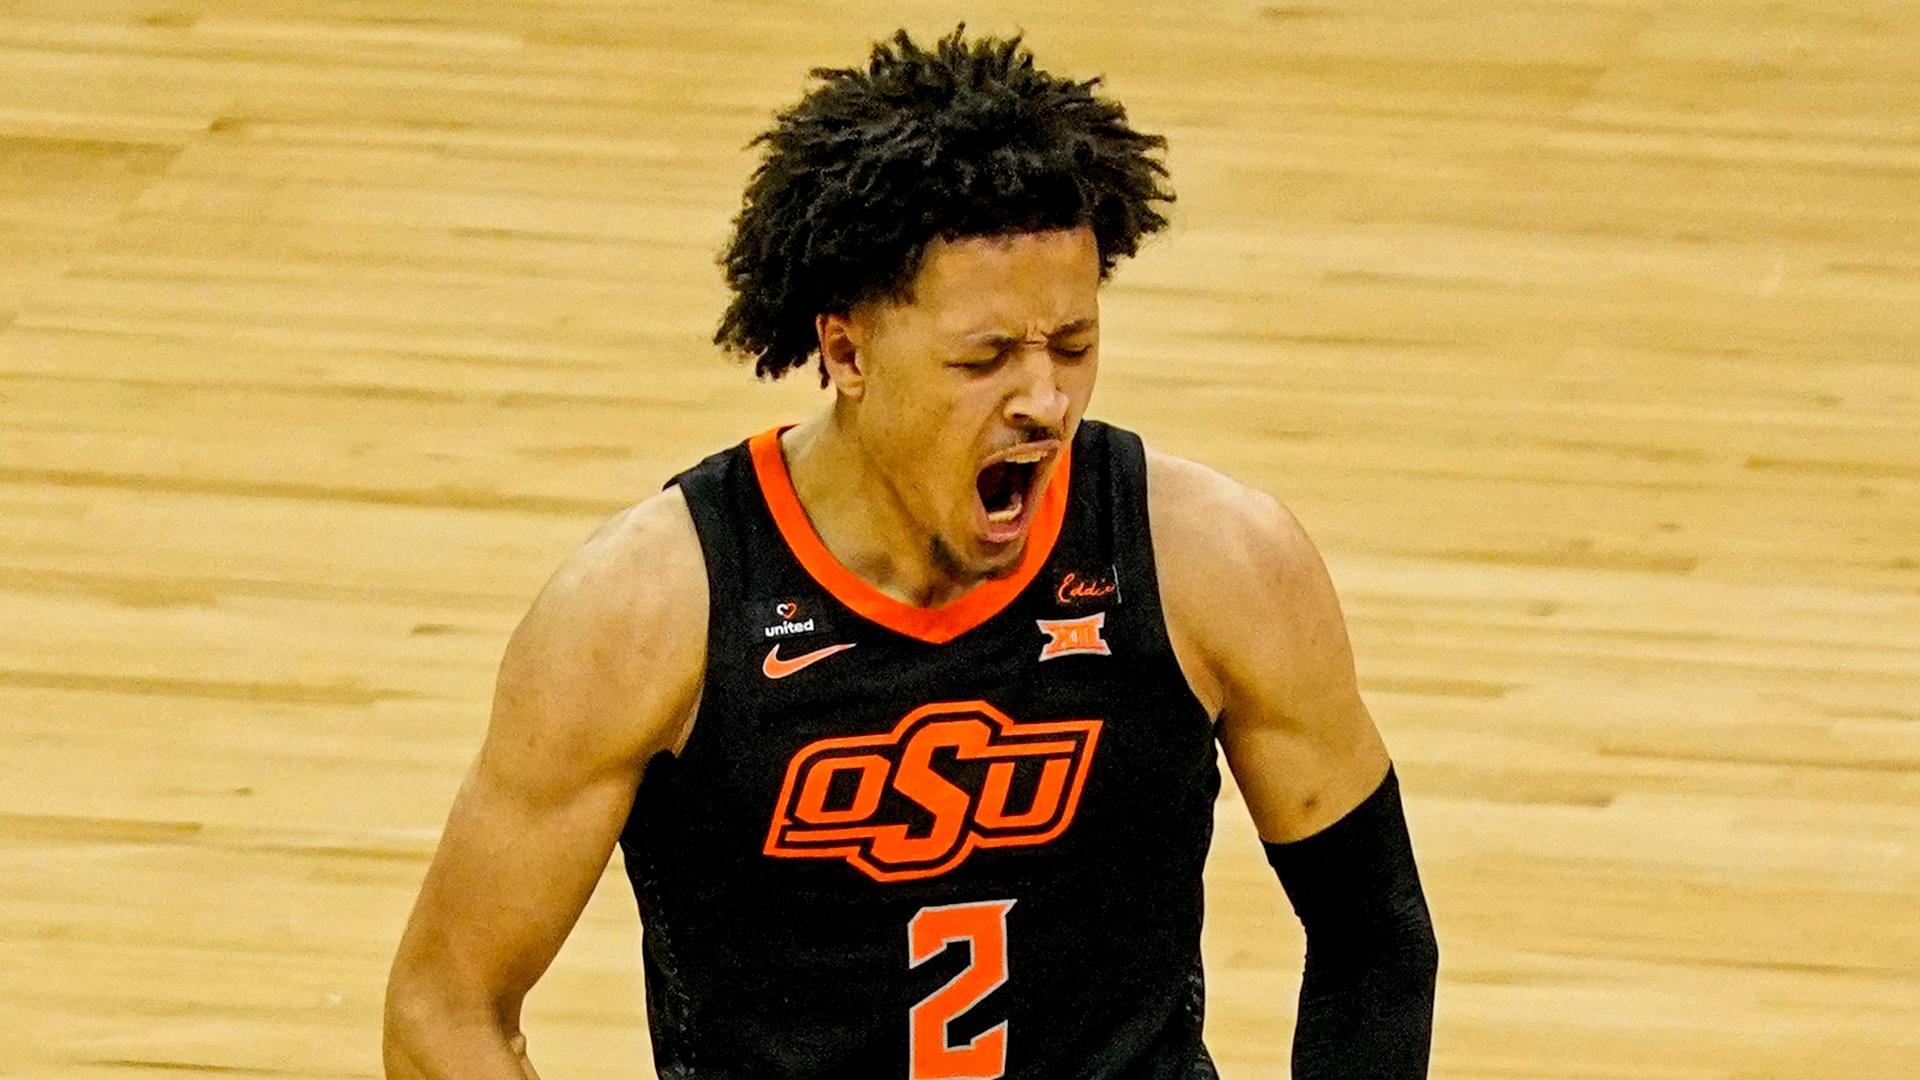 guards in the 2021 NBA Draft, led by No. 1 prospect Cade Cunningham